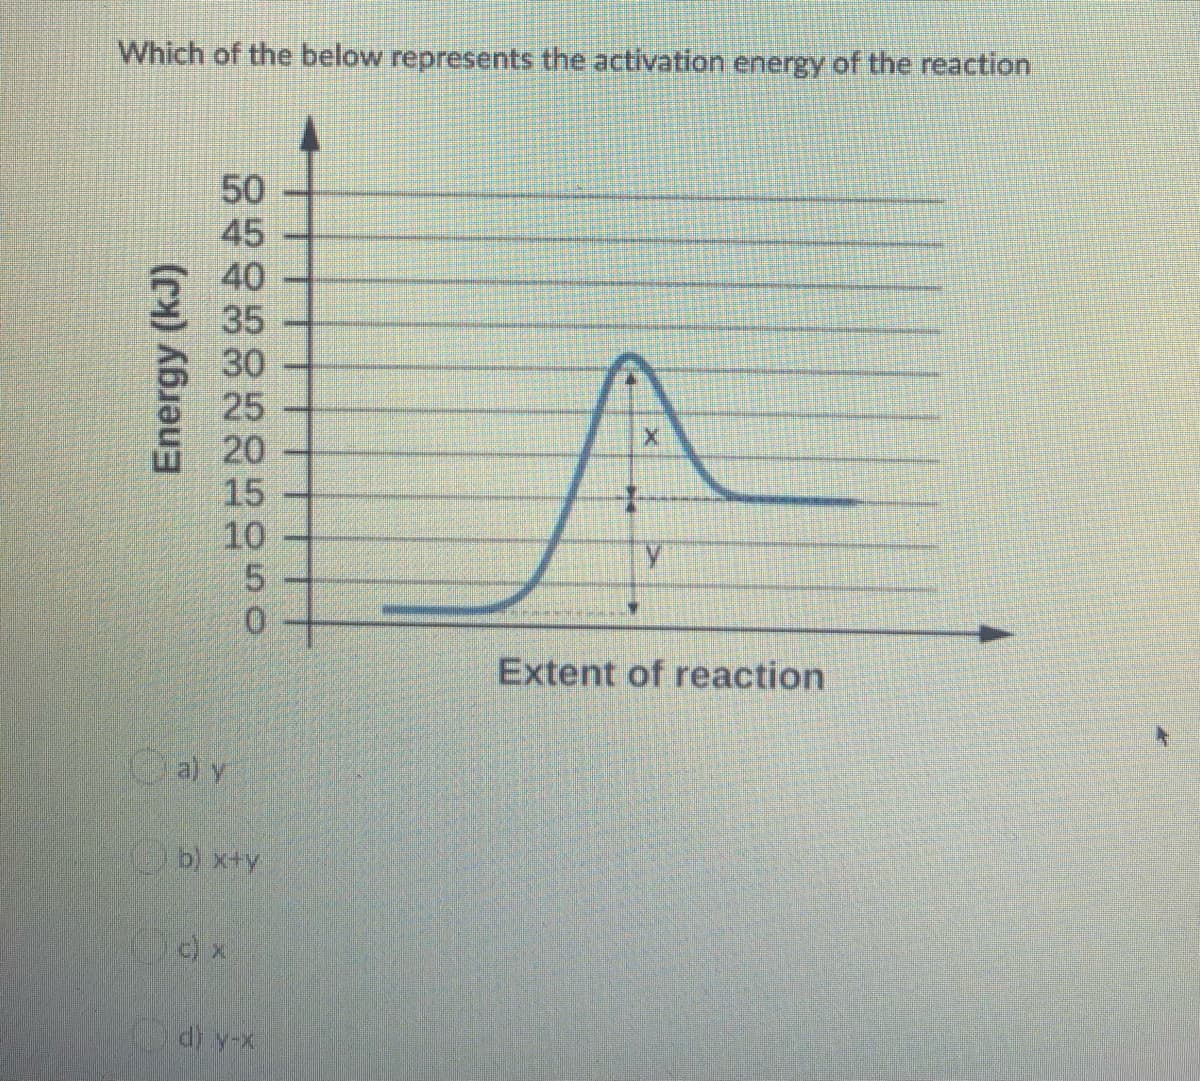 Which of the below represents the activation energy of the reaction
50
45
40
35
30
25
20
15
10
5.
Extent of reaction
al y
b) x+y
c) x
d) y-x
Energy (kJ)
